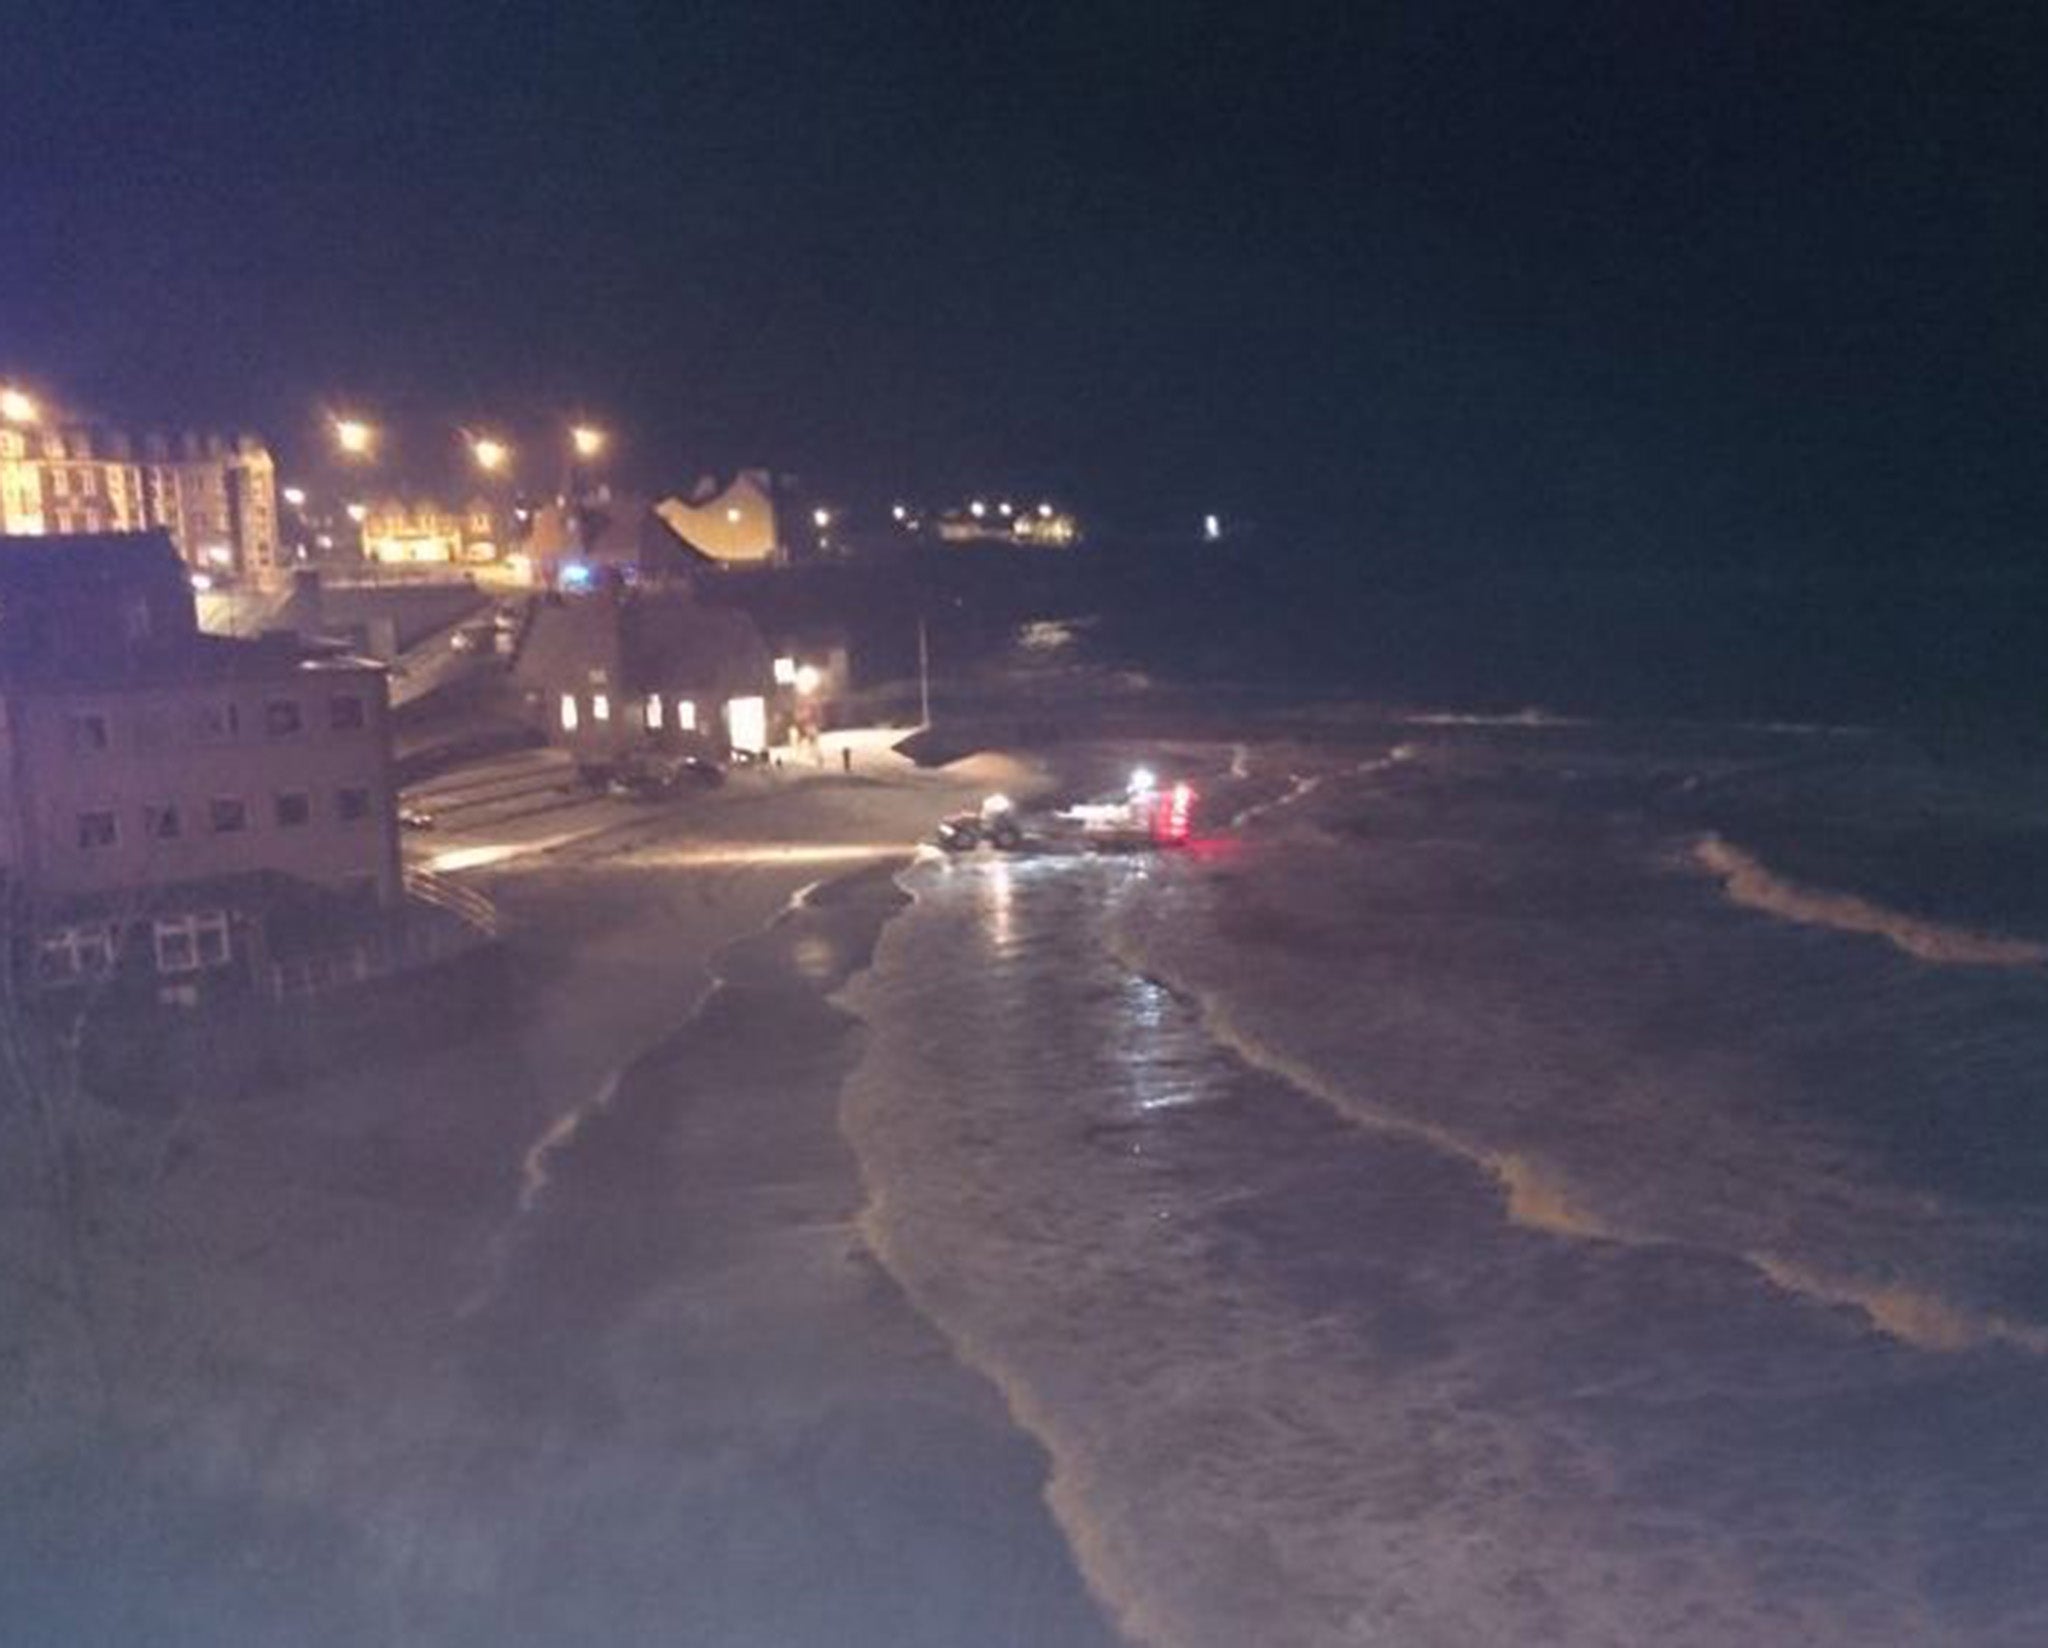 The rescue teams trying to help the teenager in Cullercoats Bay on Saturday evening